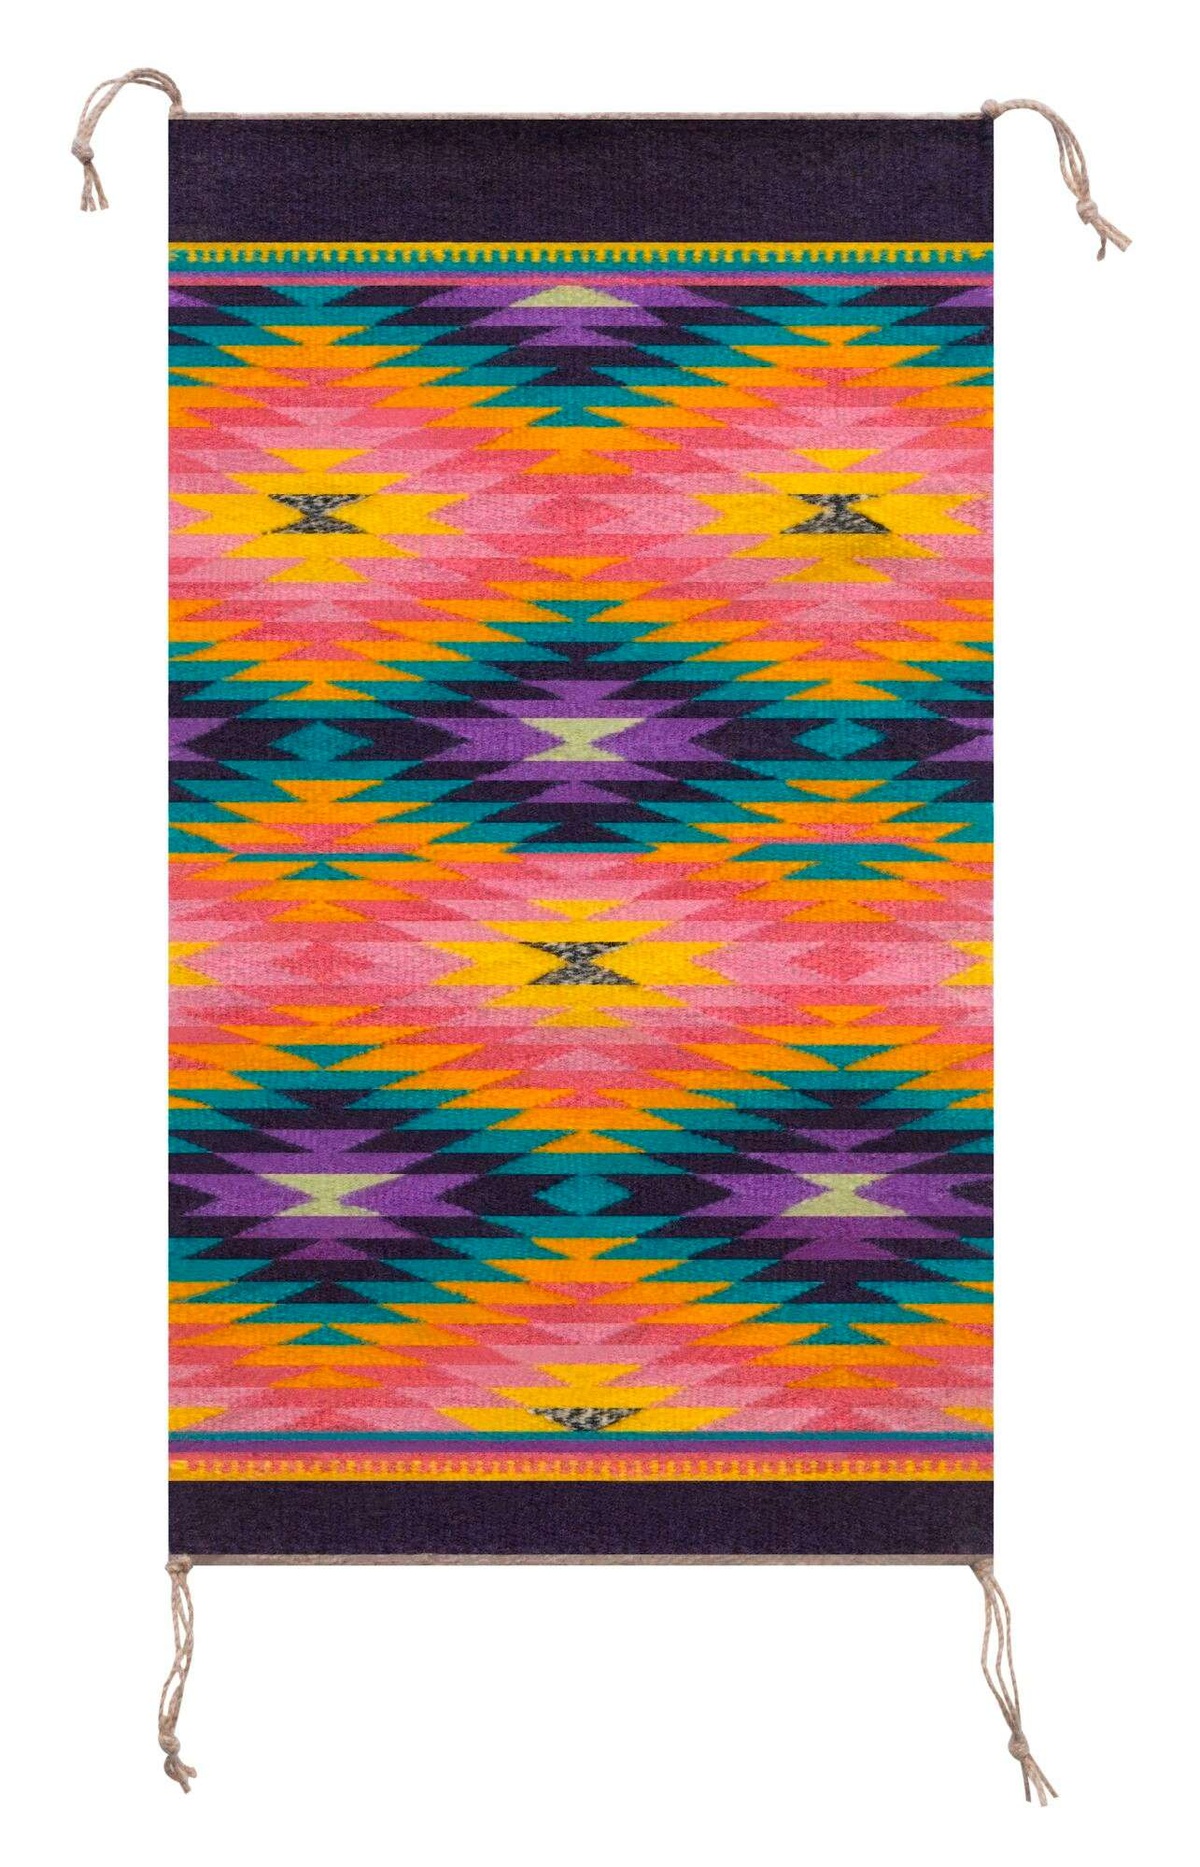 A vertical wall hanging covered in a diamond-shaped pattern woven by the artist Melissa Cody. It is multicolorded, with shades of purple, pink, yellow, teal, beige, and black.